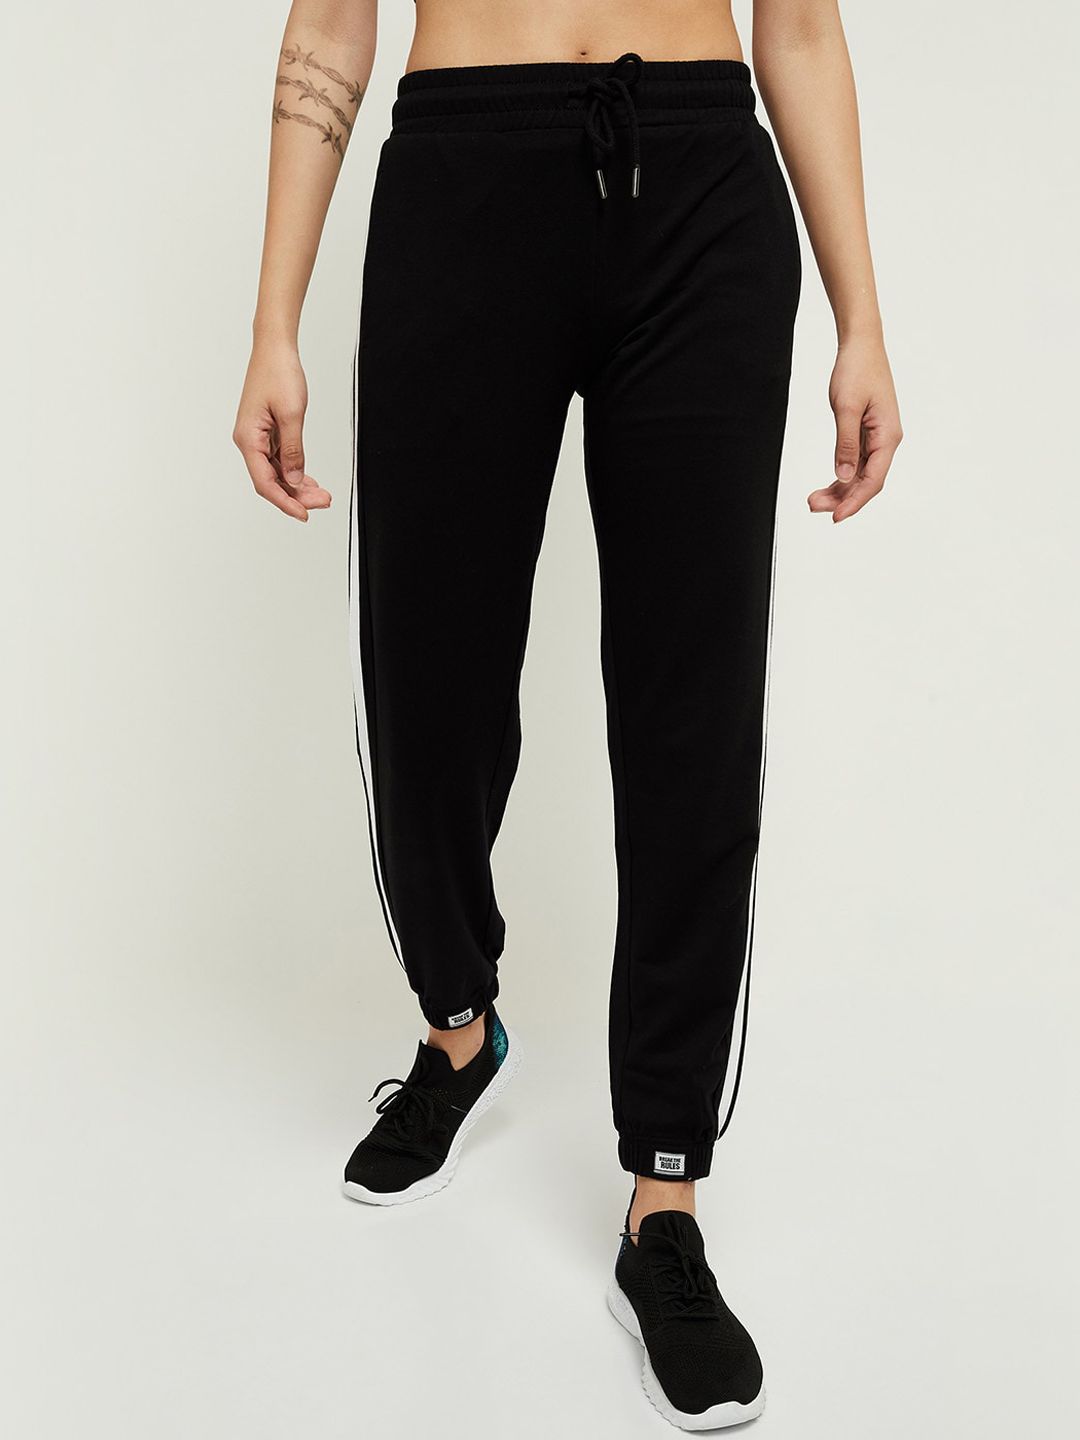 max Women Black Side Striped Joggers Price in India